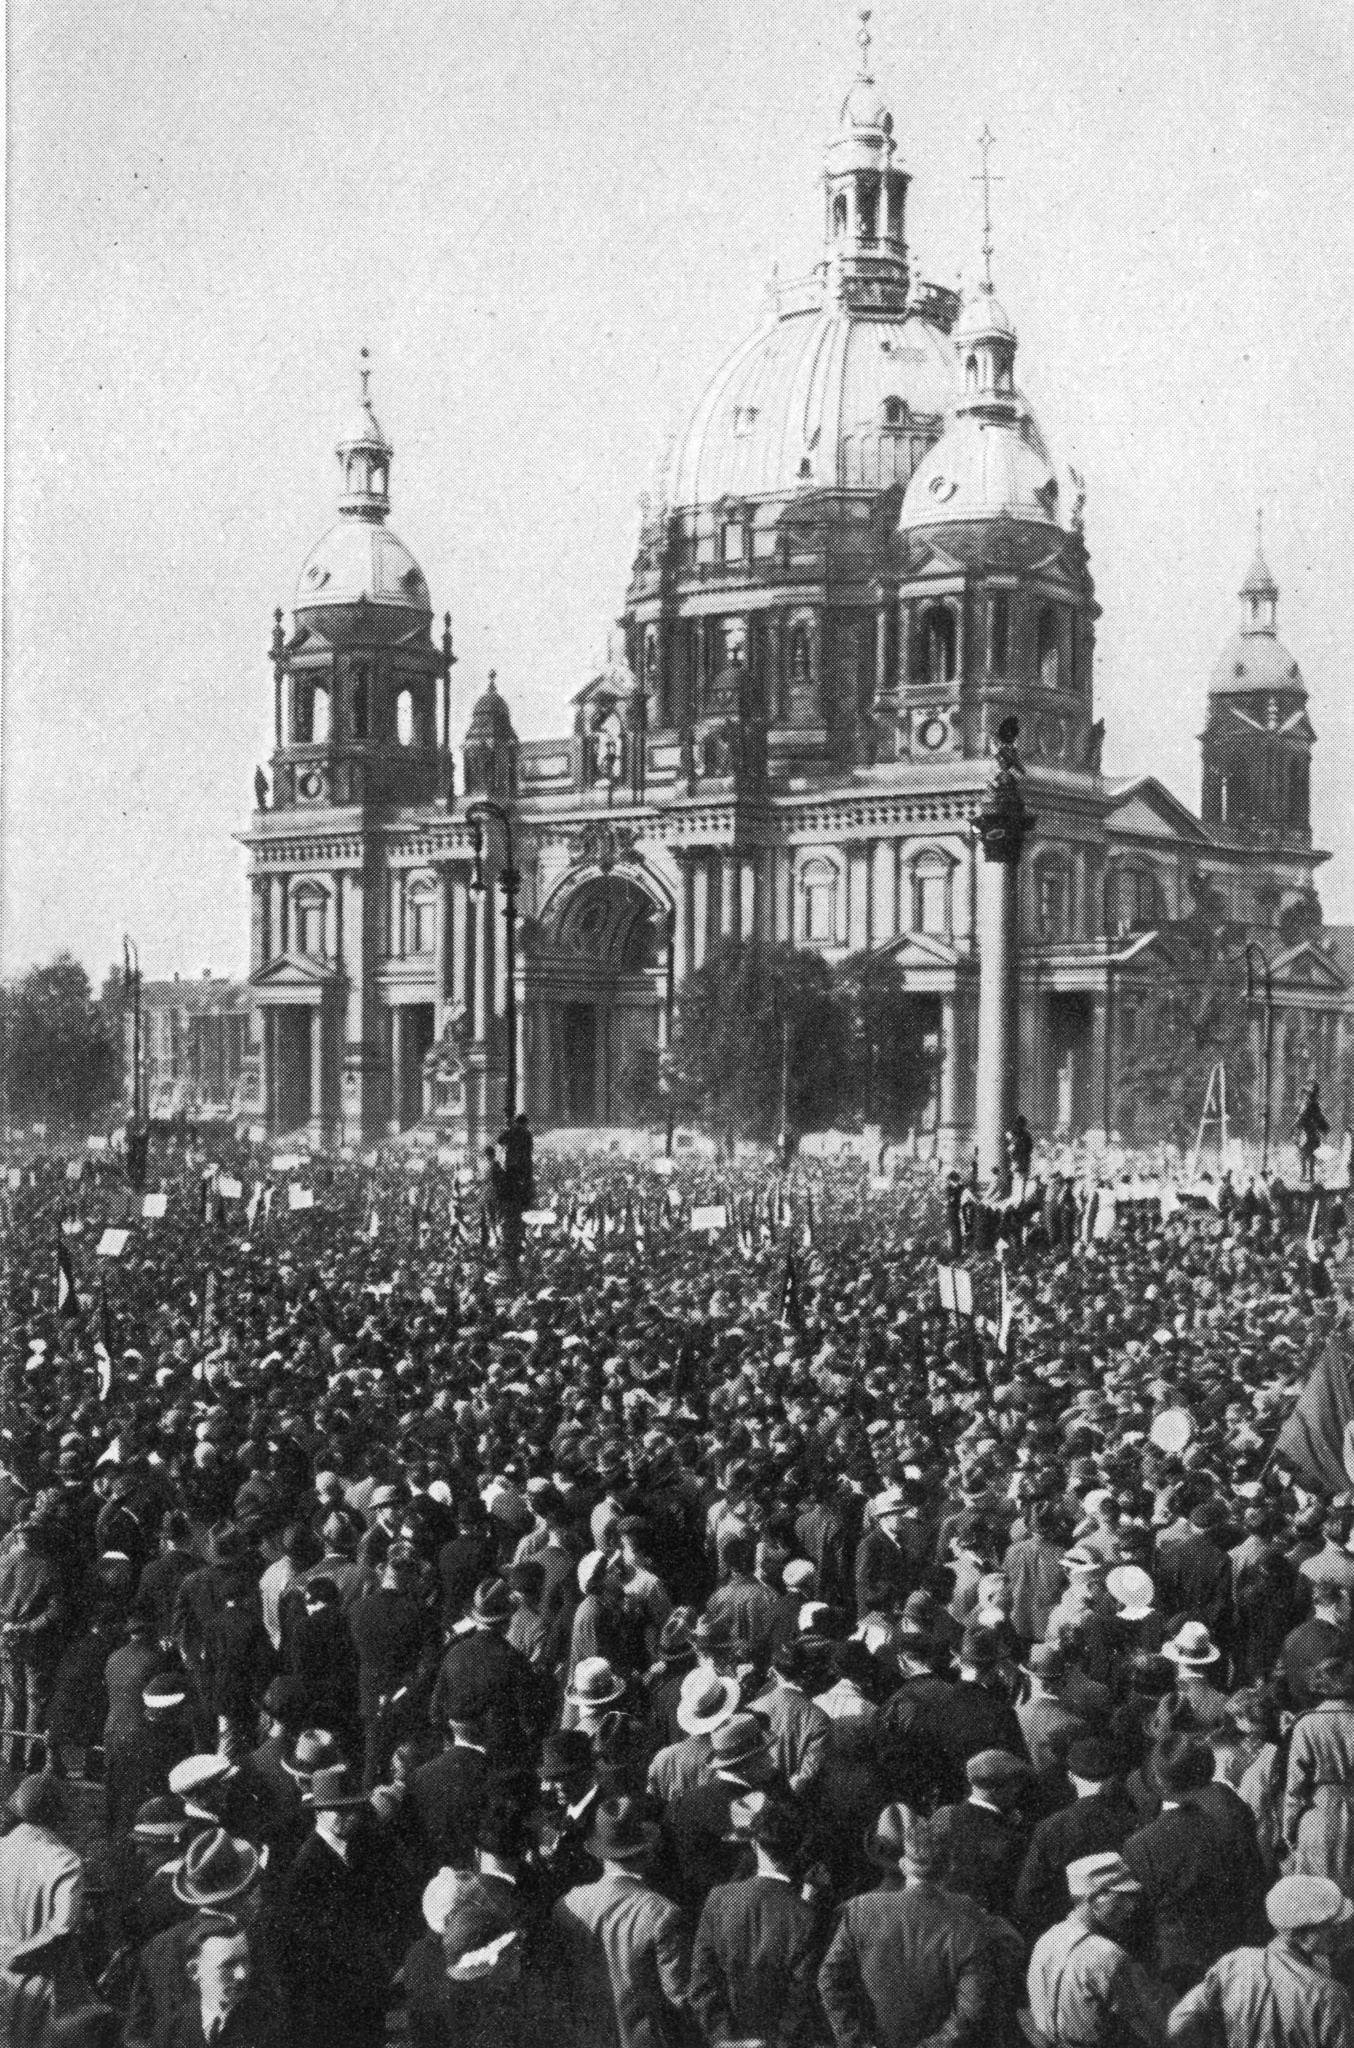 Cathedral Crowd, Berlin, 1930